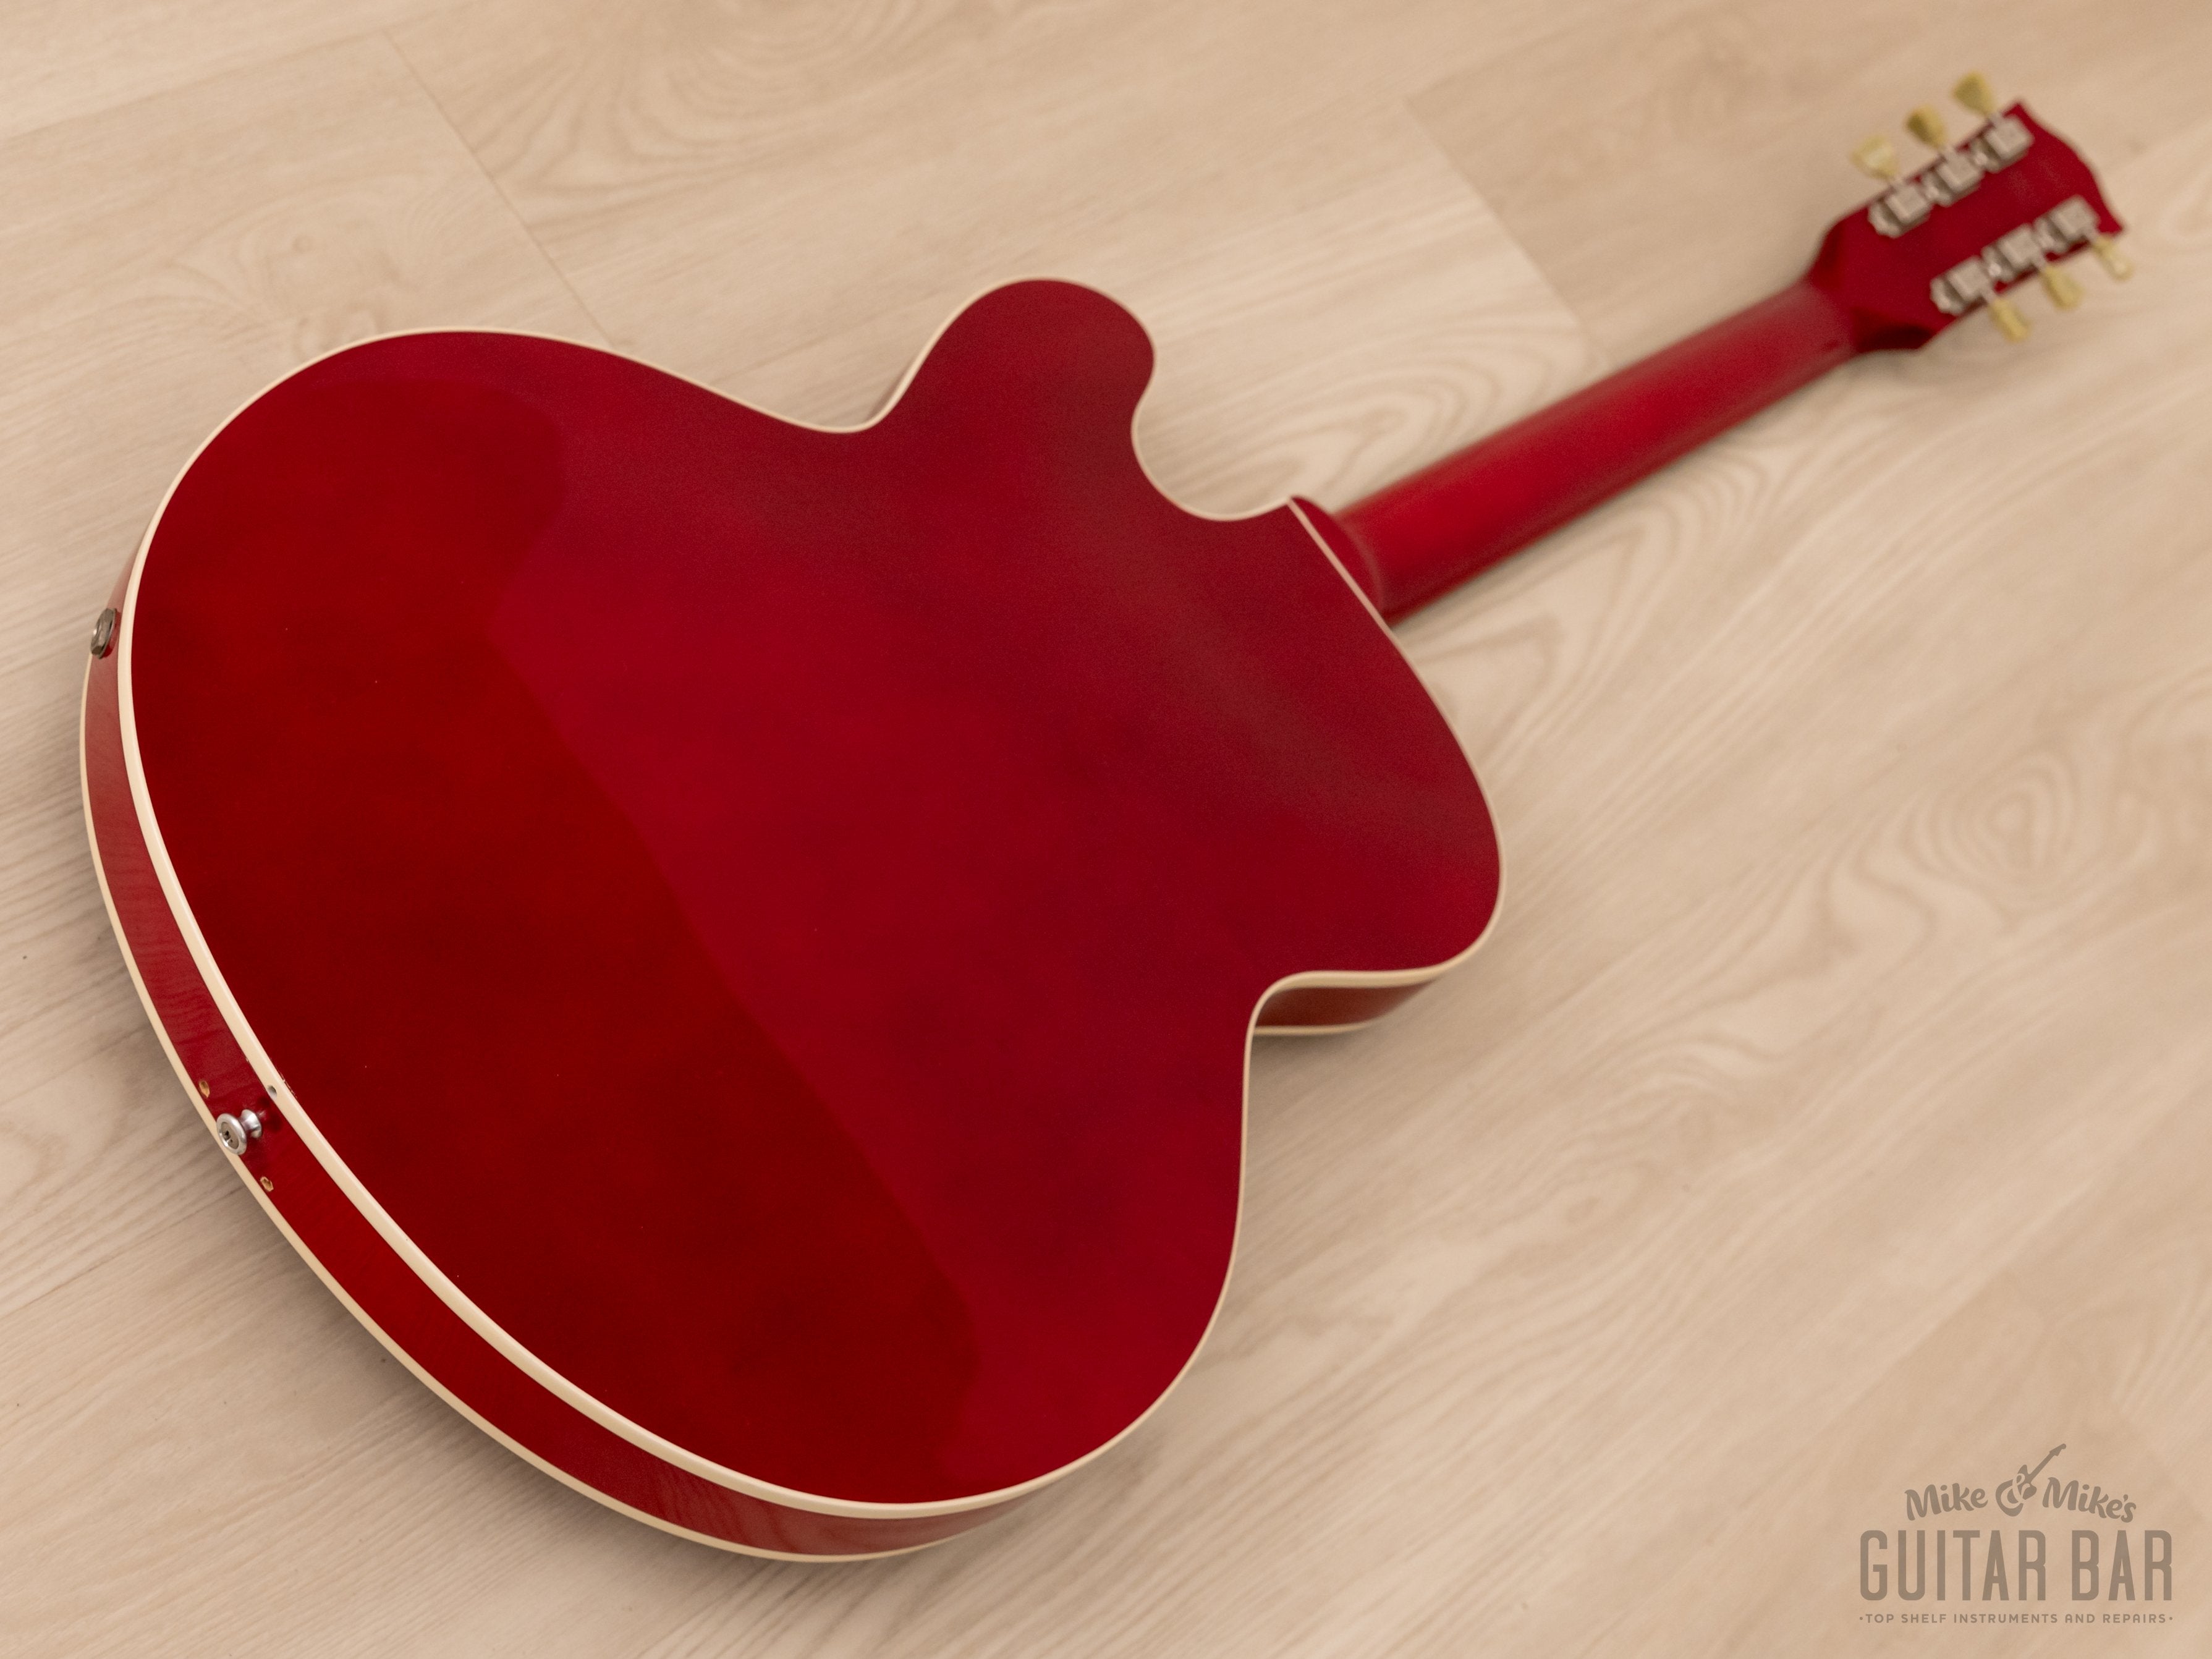 1990 Gibson Chet Atkins Tennessean Semi-Hollow Guitar Wine Red Near-Mint w/ Case & Tags, Yamano